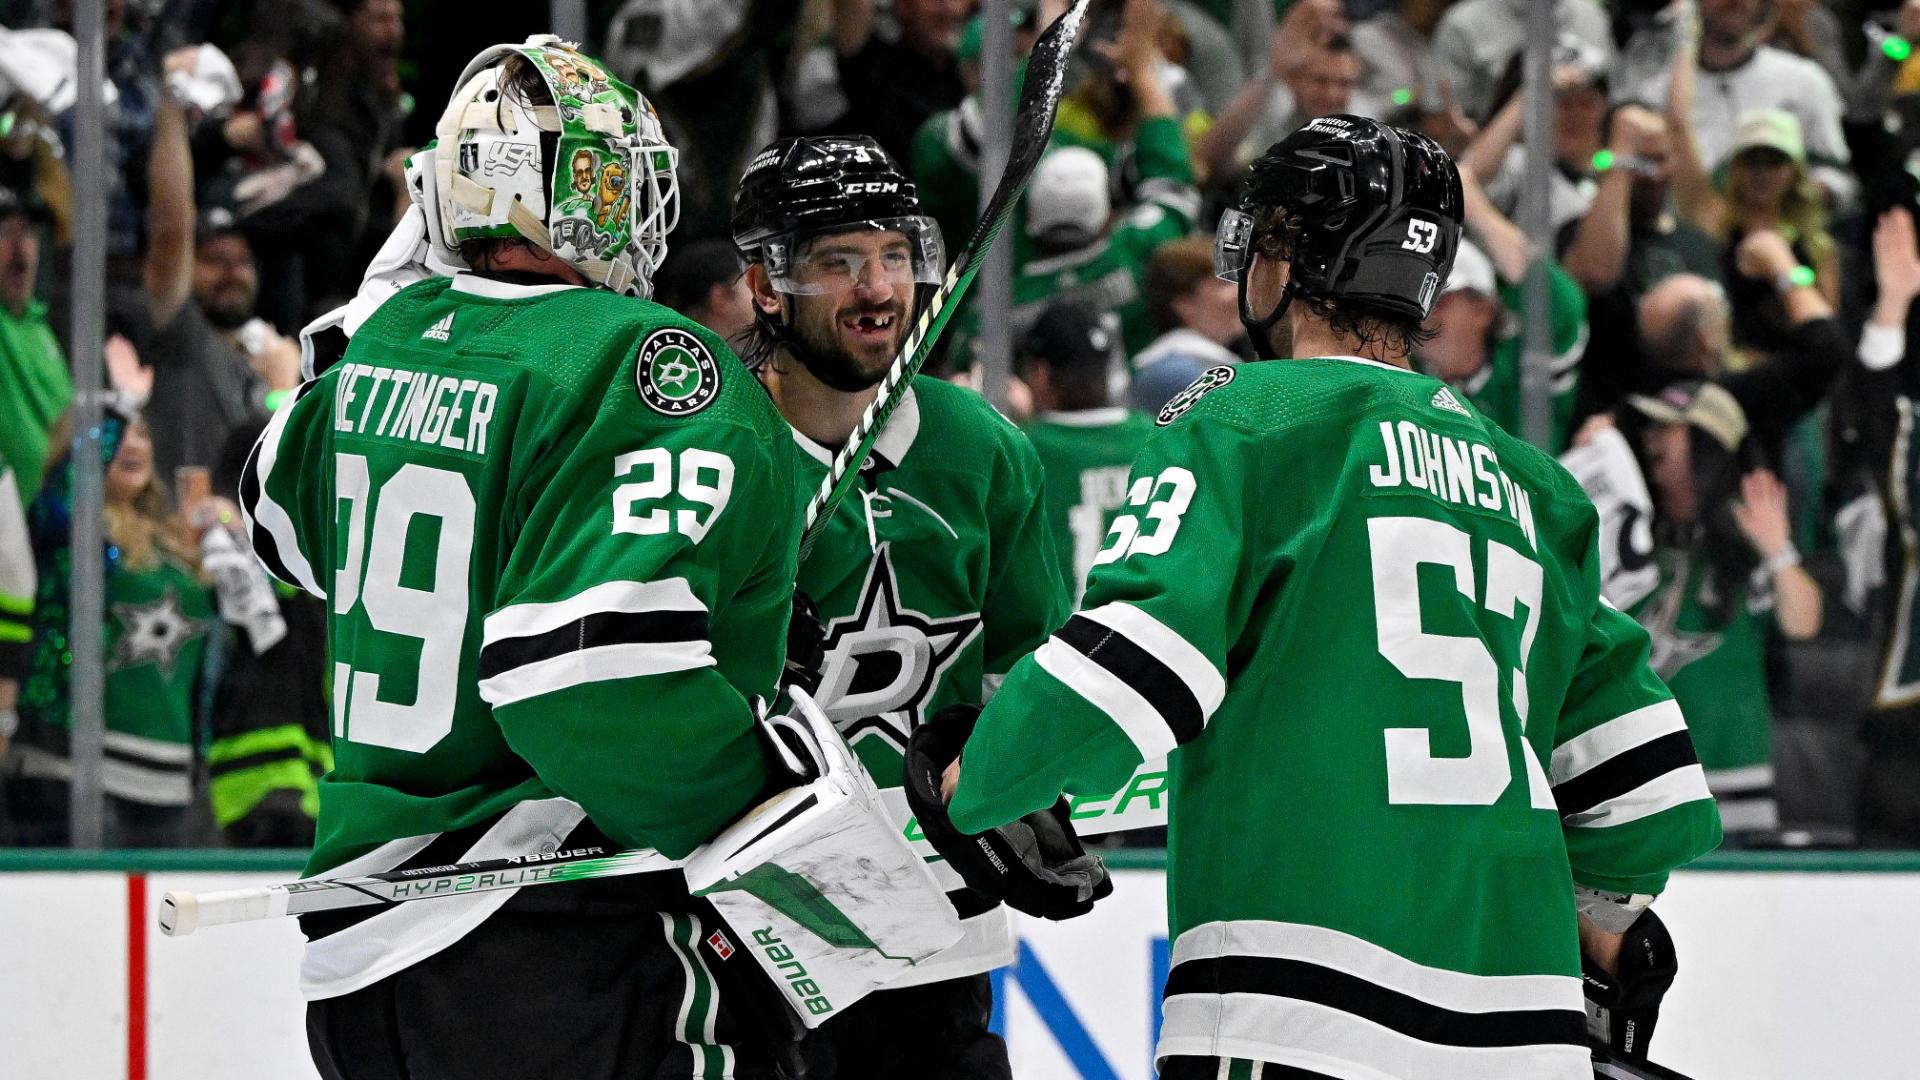 Stars hold off Golden Knights in final seconds for series win